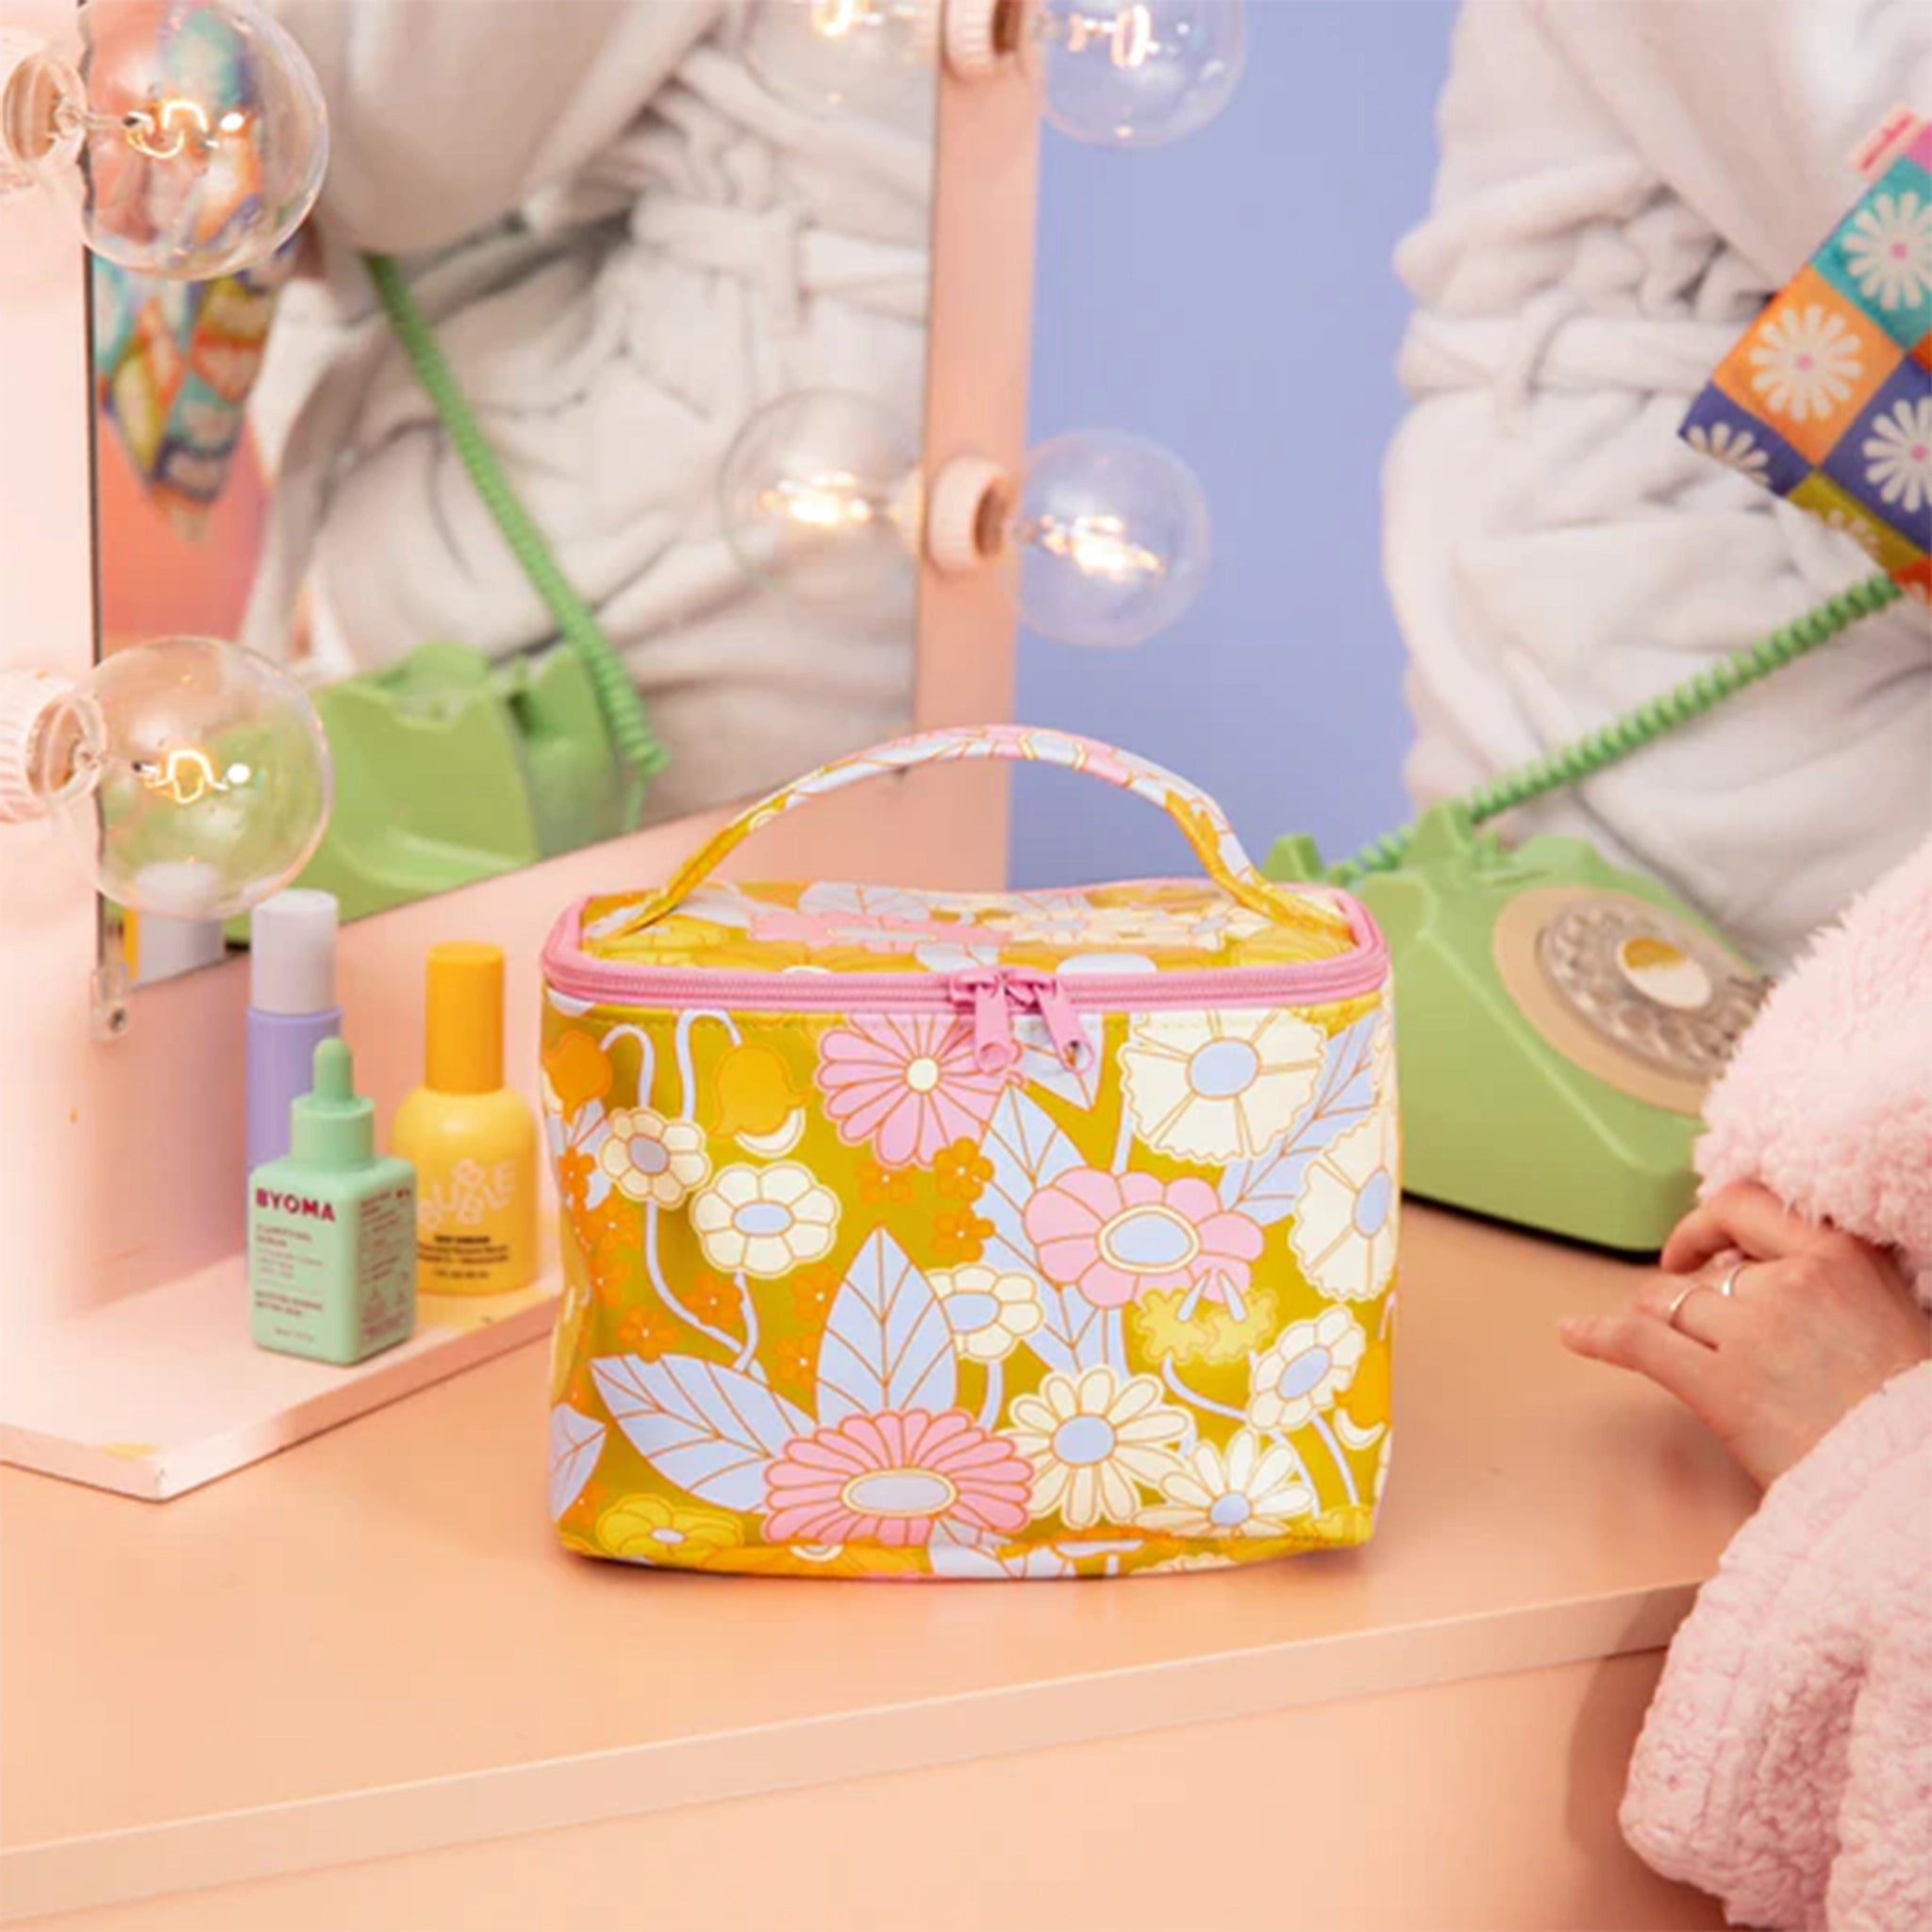 A colorful floral printed cosmetics bag with a flat top and bottom, curved edge and a single strap on top as well as a zip around closure. The floral design features shades of olive green, creams, pink, and light blue.